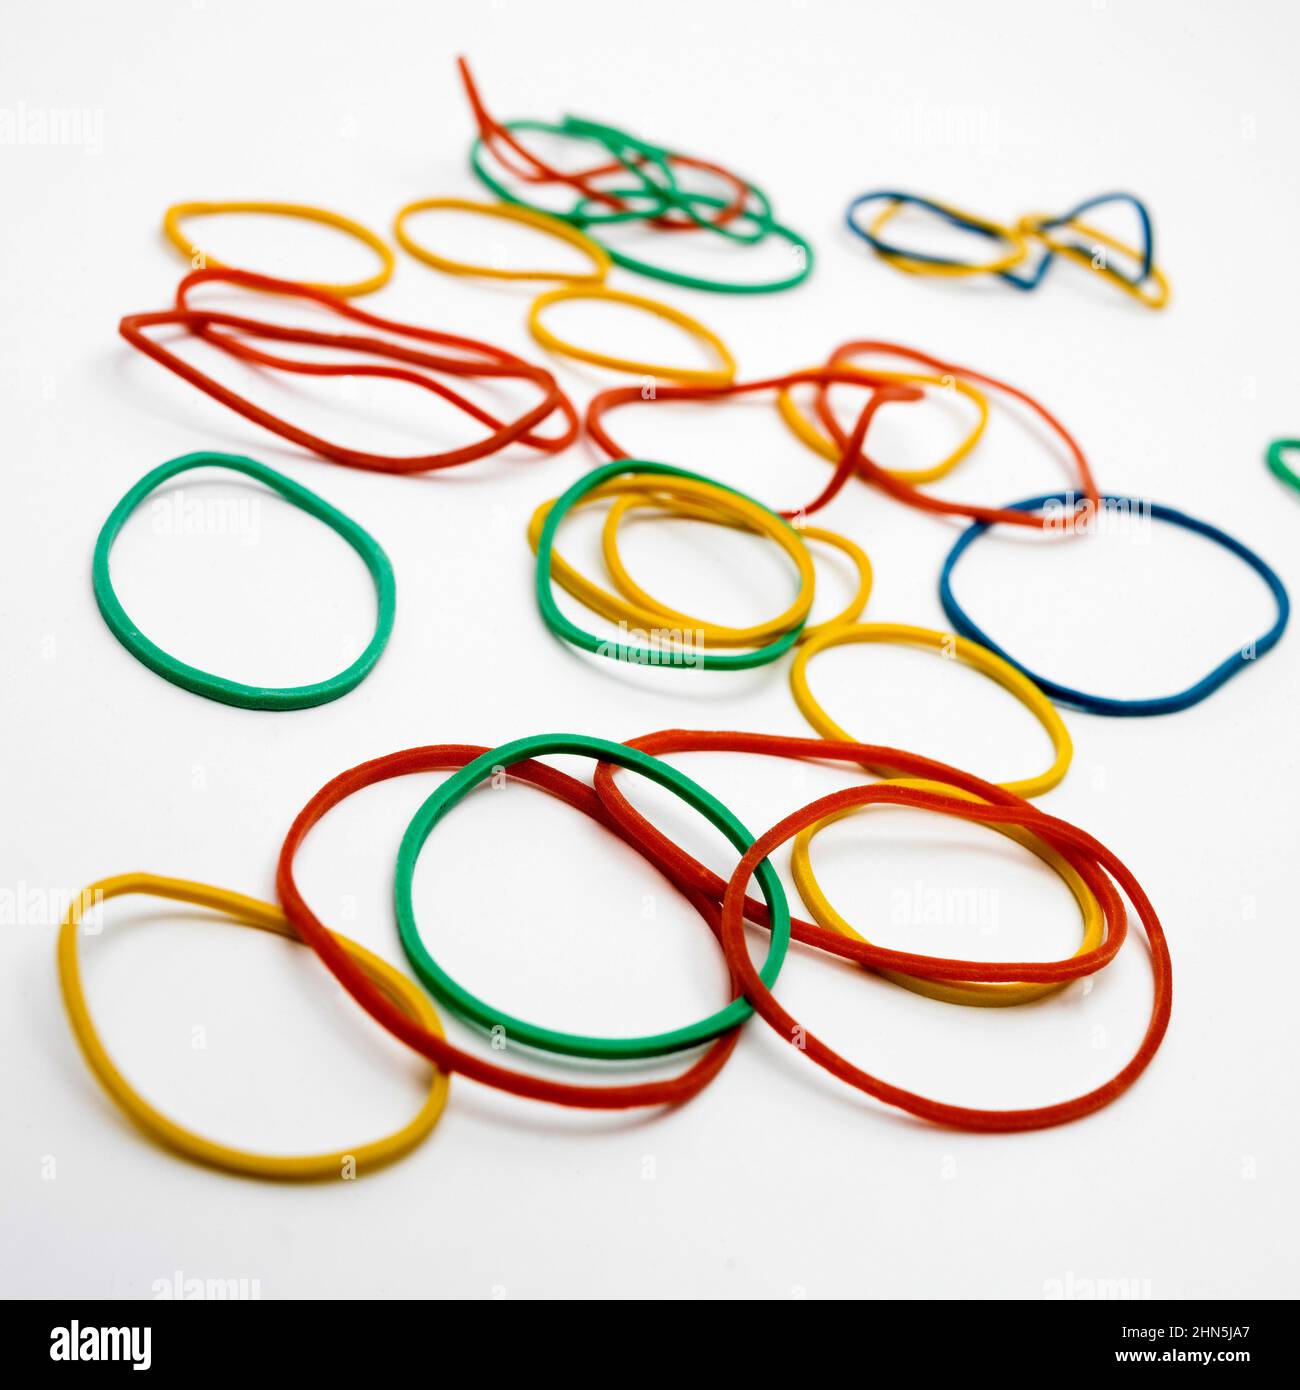 Closeup high angle shot of colorful rubber bands on a white background Stock Photo